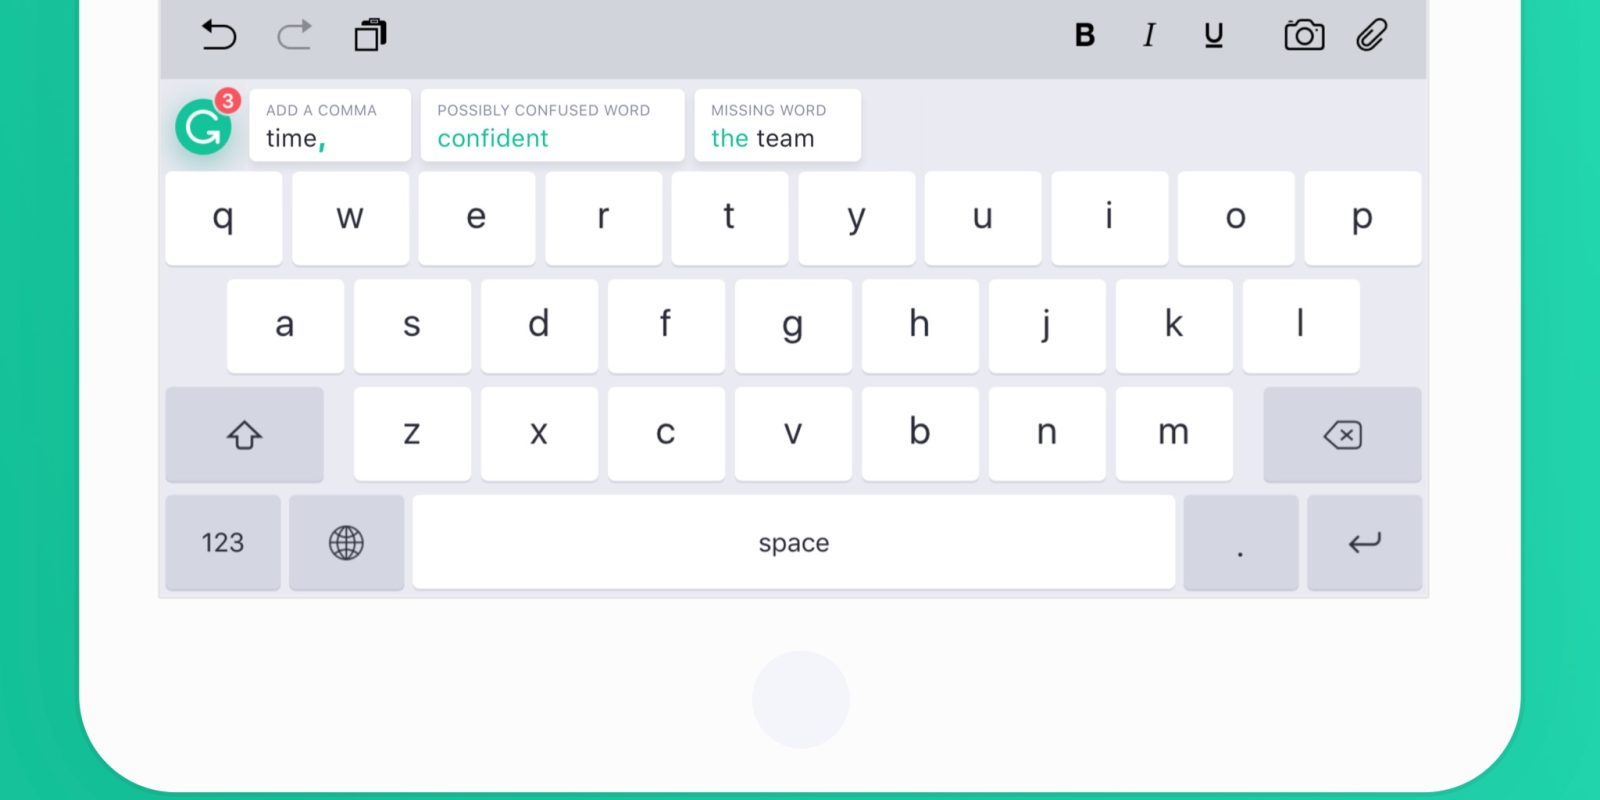 Grammarly Launches Ios Keyboard With Advanced Grammar And Contextual Spell  Checking Features - 9To5Mac